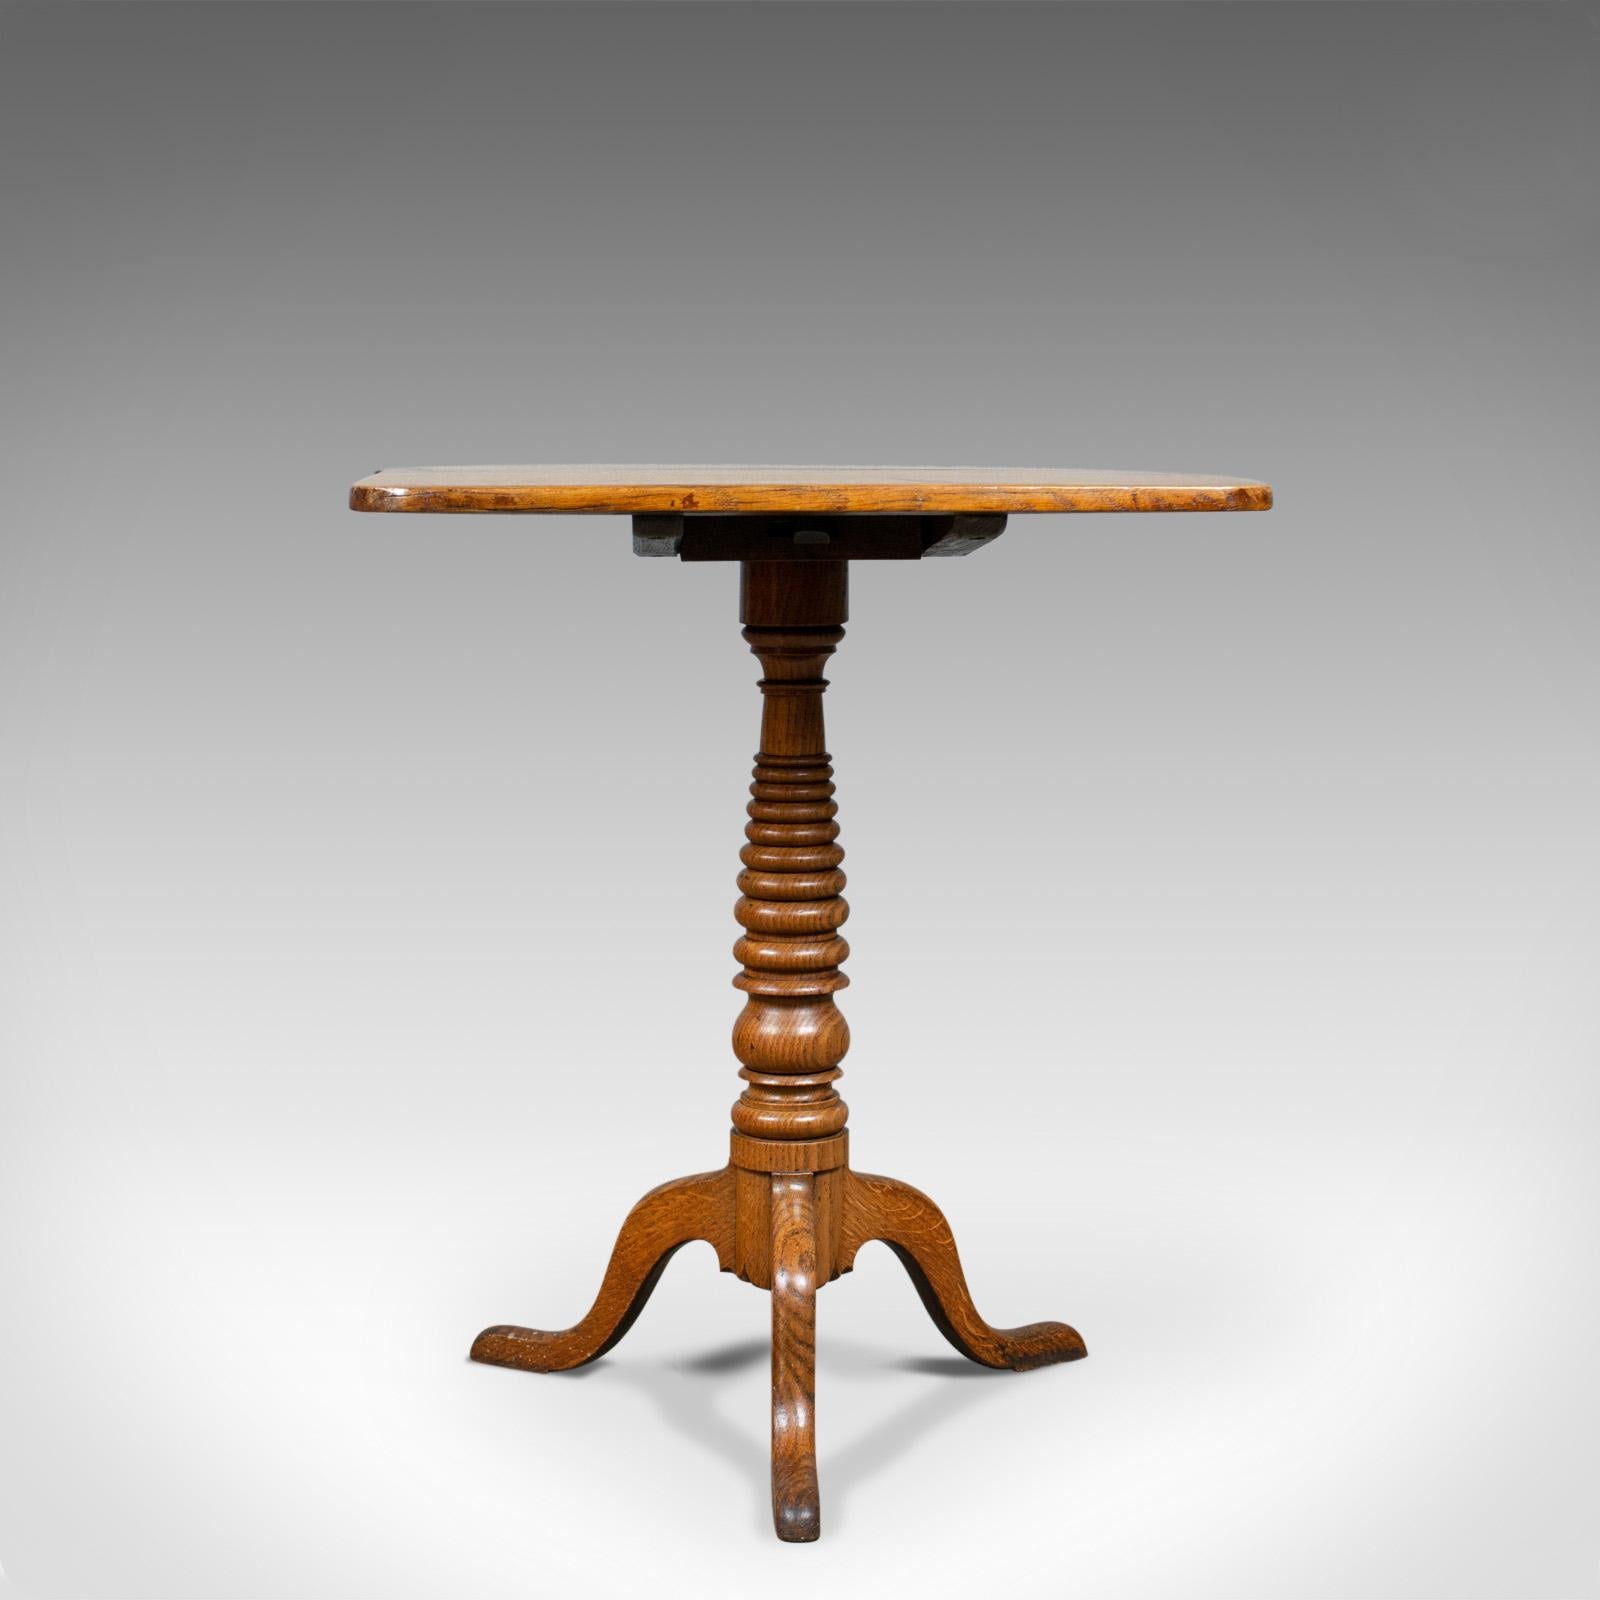 This is an antique tilt-top table. An English, Victorian, oak side table dating to the mid-19th century, circa 1870.

Golden oak displaying good grain detail with wisps of medullary rays
Deep, rich tones with a desirable aged patina
Planked top